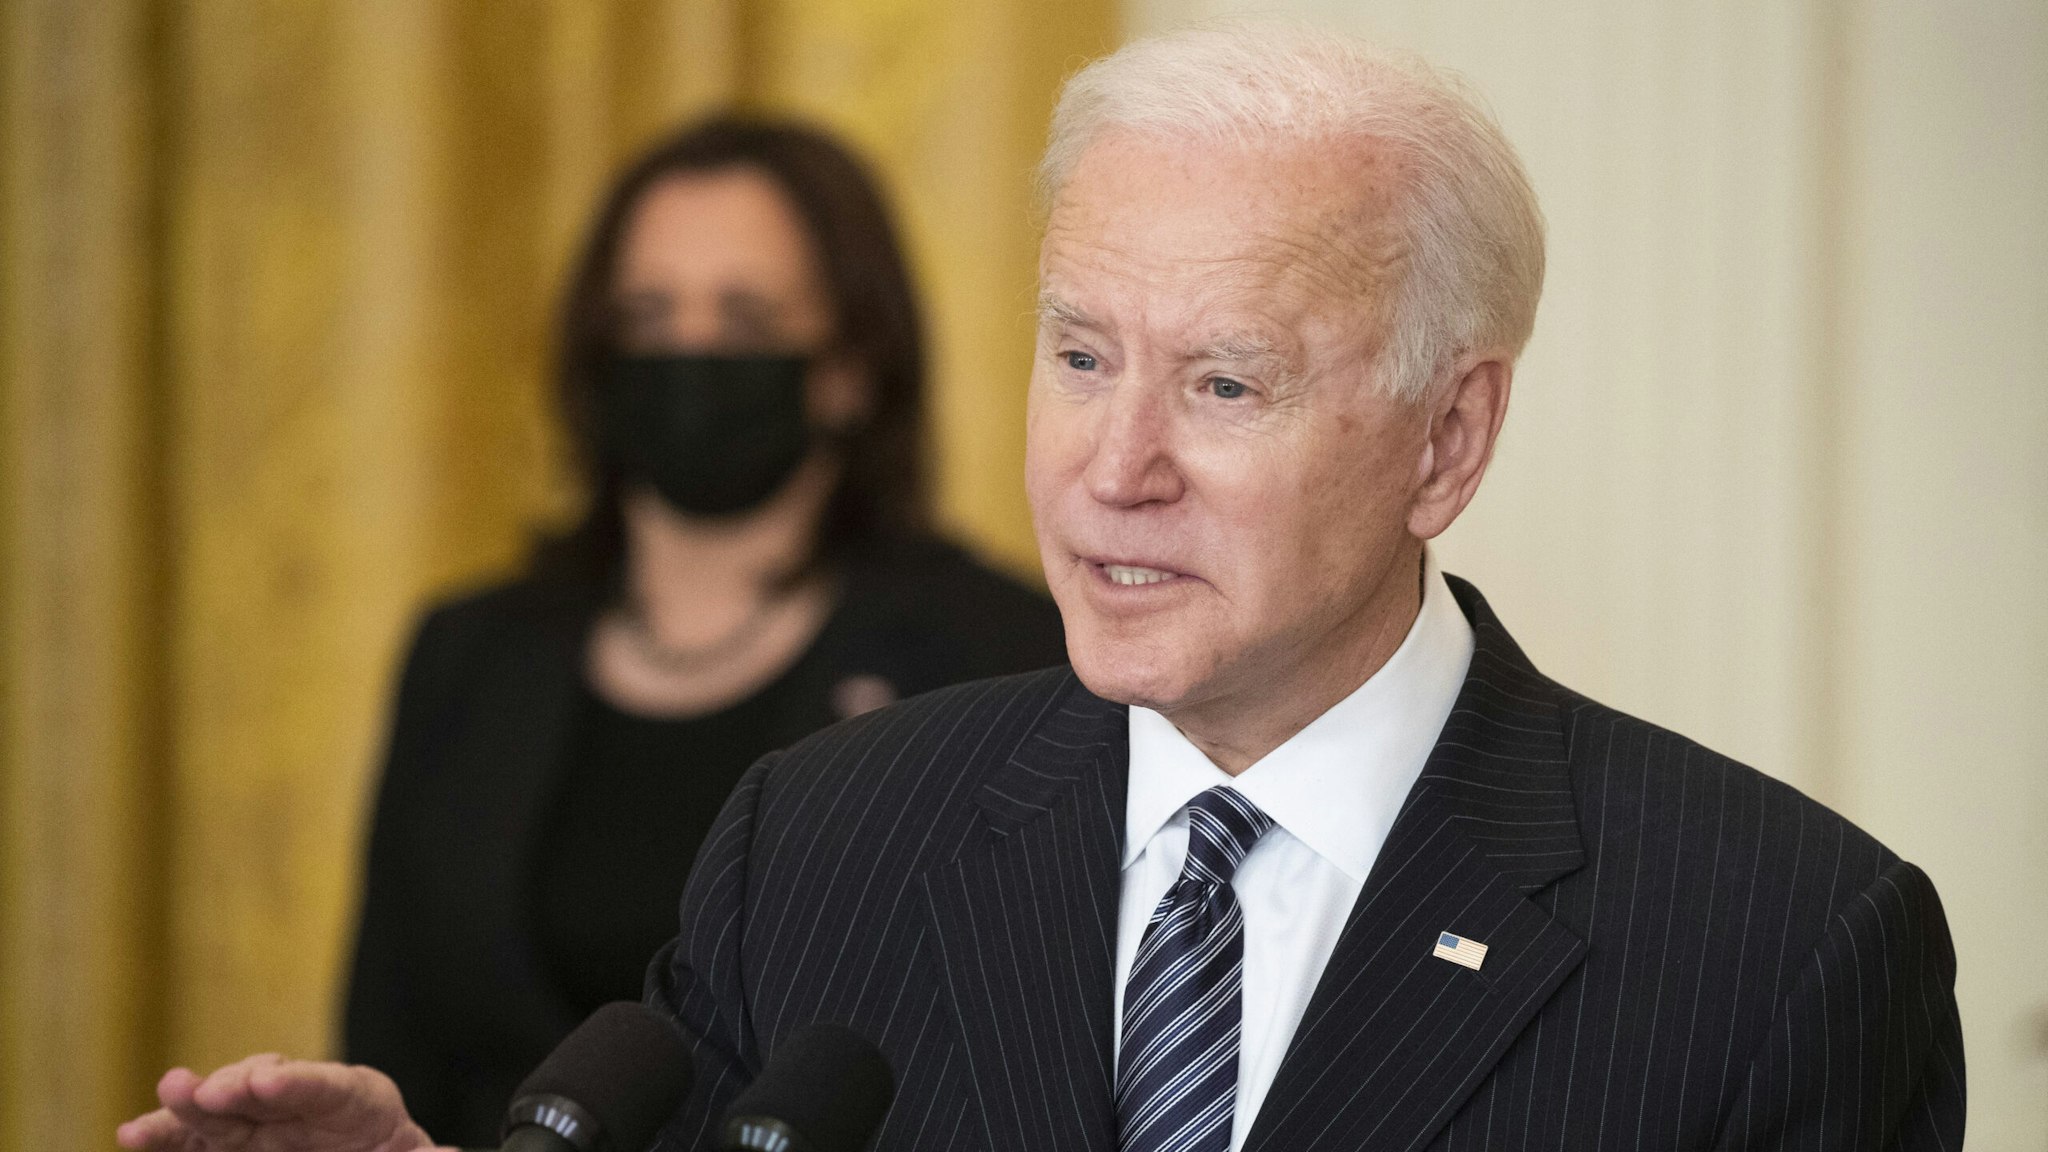 U.S. President Joe Biden speaks while delivering an address as U.S. Vice President Kamala Harris, left, listens in the East Room of the White House in Washington, D.C., U.S., on Thursday, March 18, 2021. Biden announced the U.S. on Friday will clinch his goal of administering 100 million Covid-19 vaccine shots in the first 100 days of his presidency, reaching the mark six weeks ahead of time.